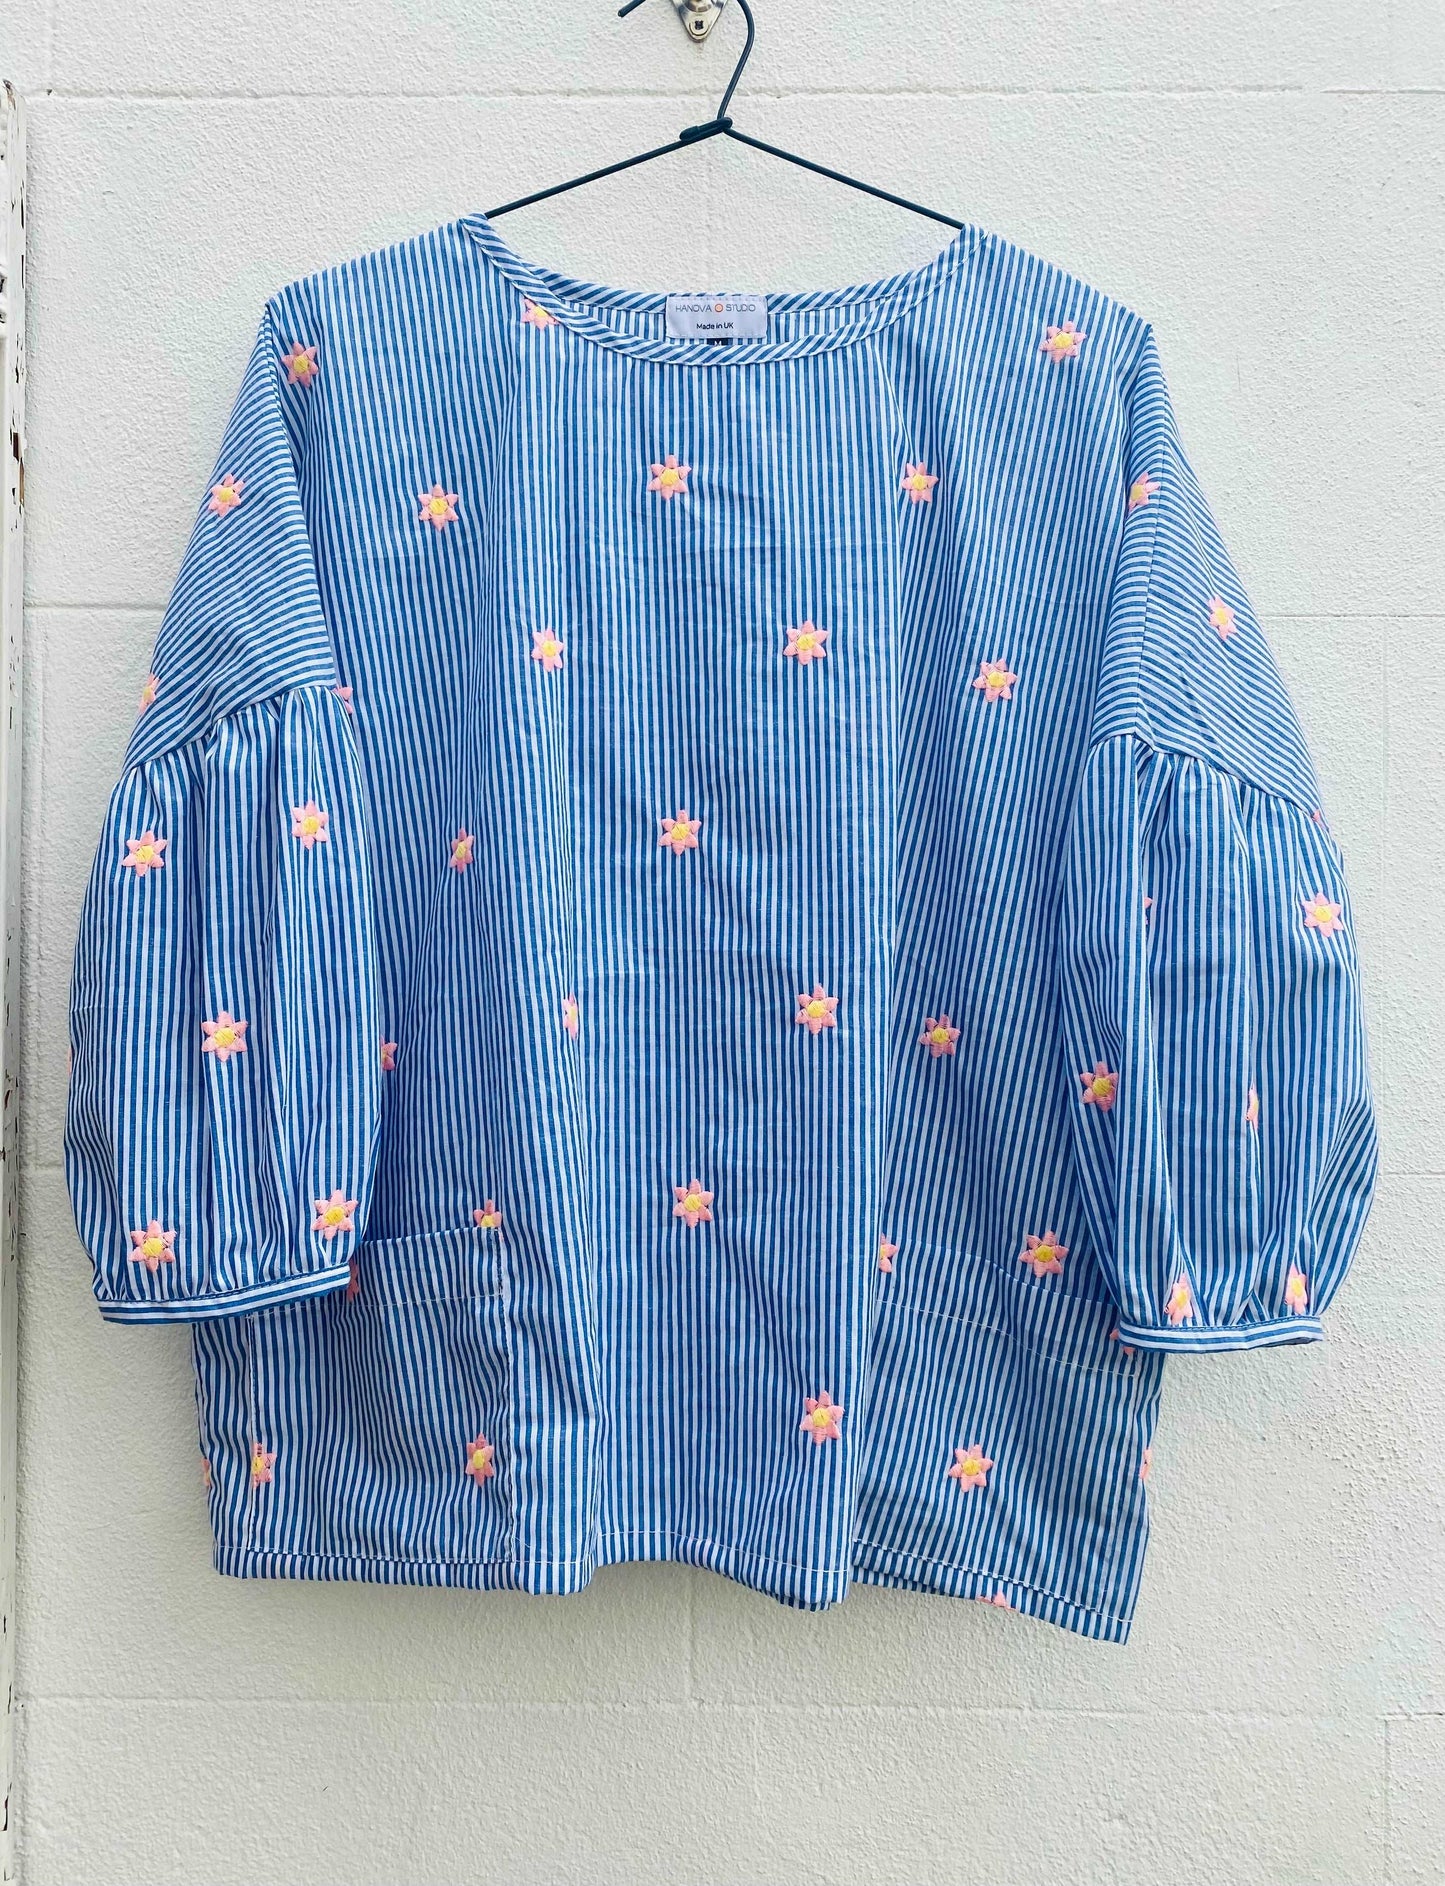 stripe blouse with embroidered stars